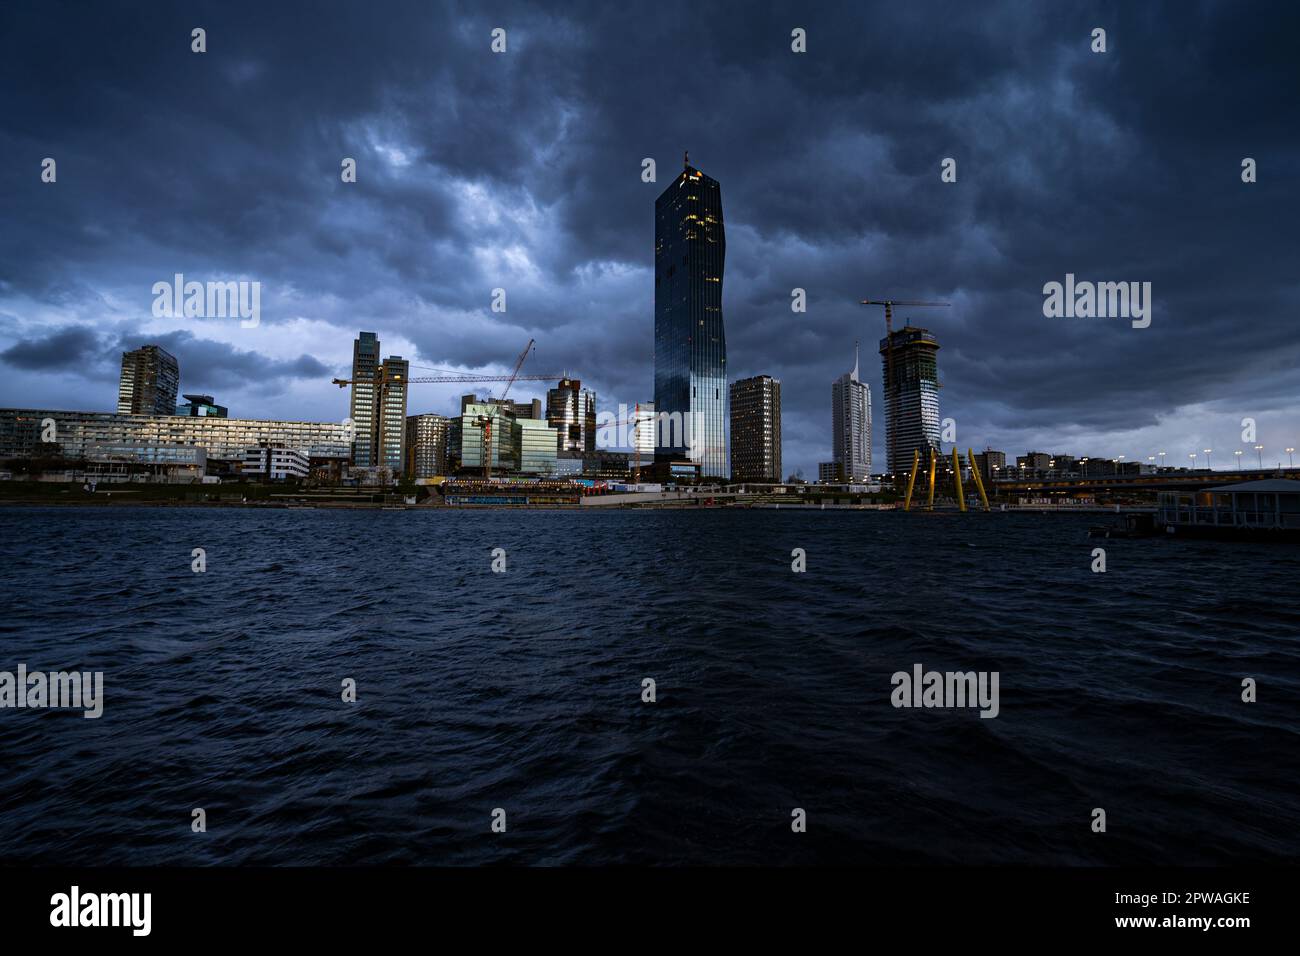 Donau City in Vienna at stormy weather Stock Photo